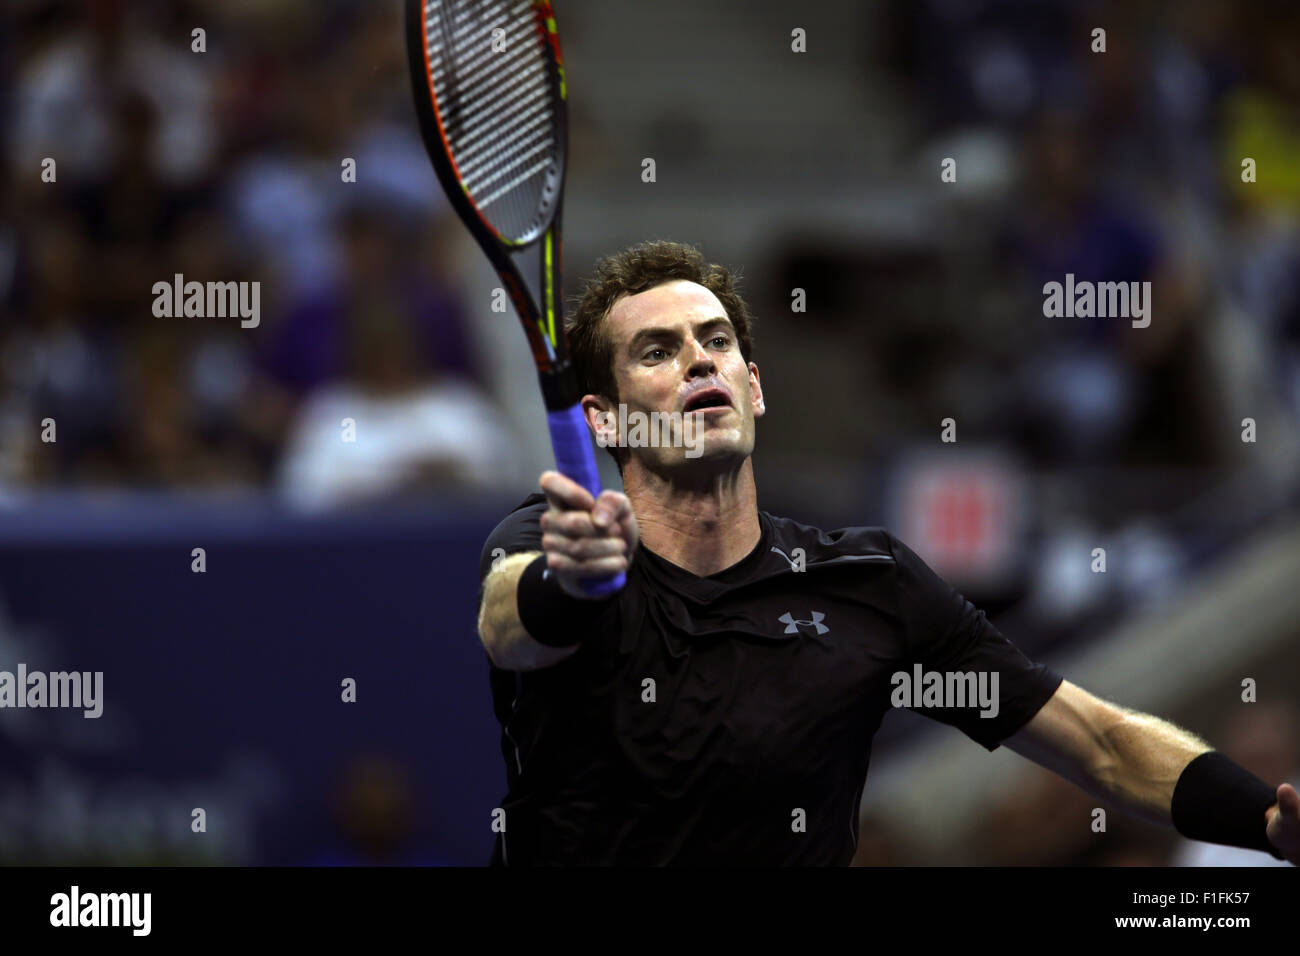 New York, USA. 01st Sep, 2015. Great Britain's Andy Murray sin action against Nick Krygios during their first round match at the U.S. Open in Flushing Meadows, New York on September 1st, 2015. Credit:  Adam Stoltman/Alamy Live News Stock Photo